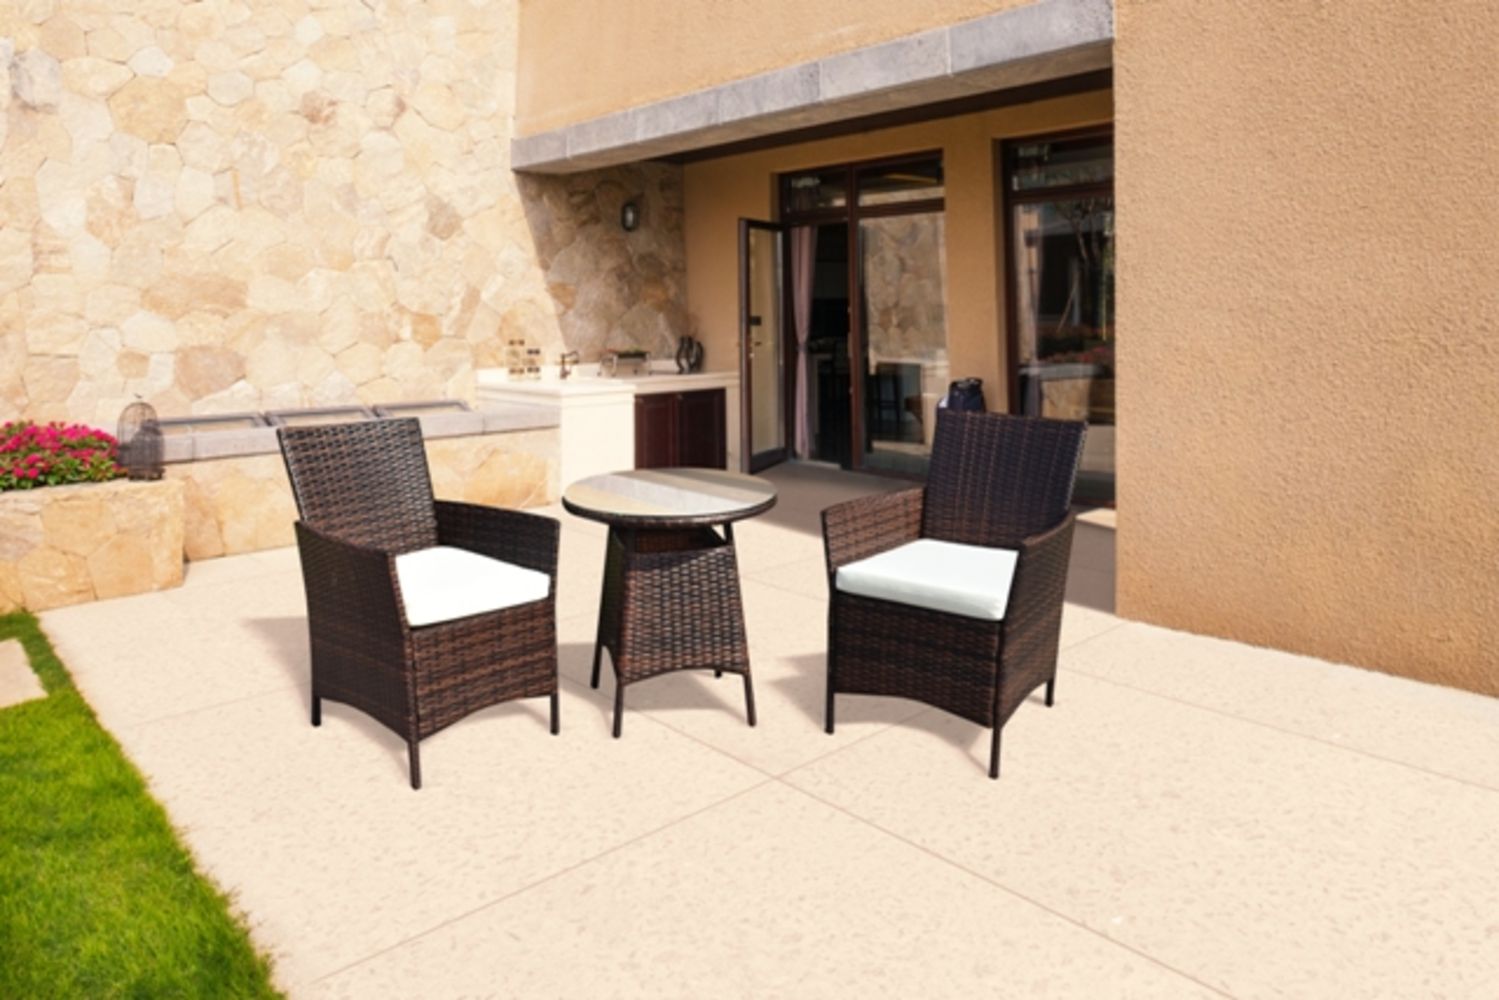 Over £100,000 Of New Rattan Garden Furniture, Sun loungers, Heaters, Dining Sets ETC, Winter Sale With Clearance Prices